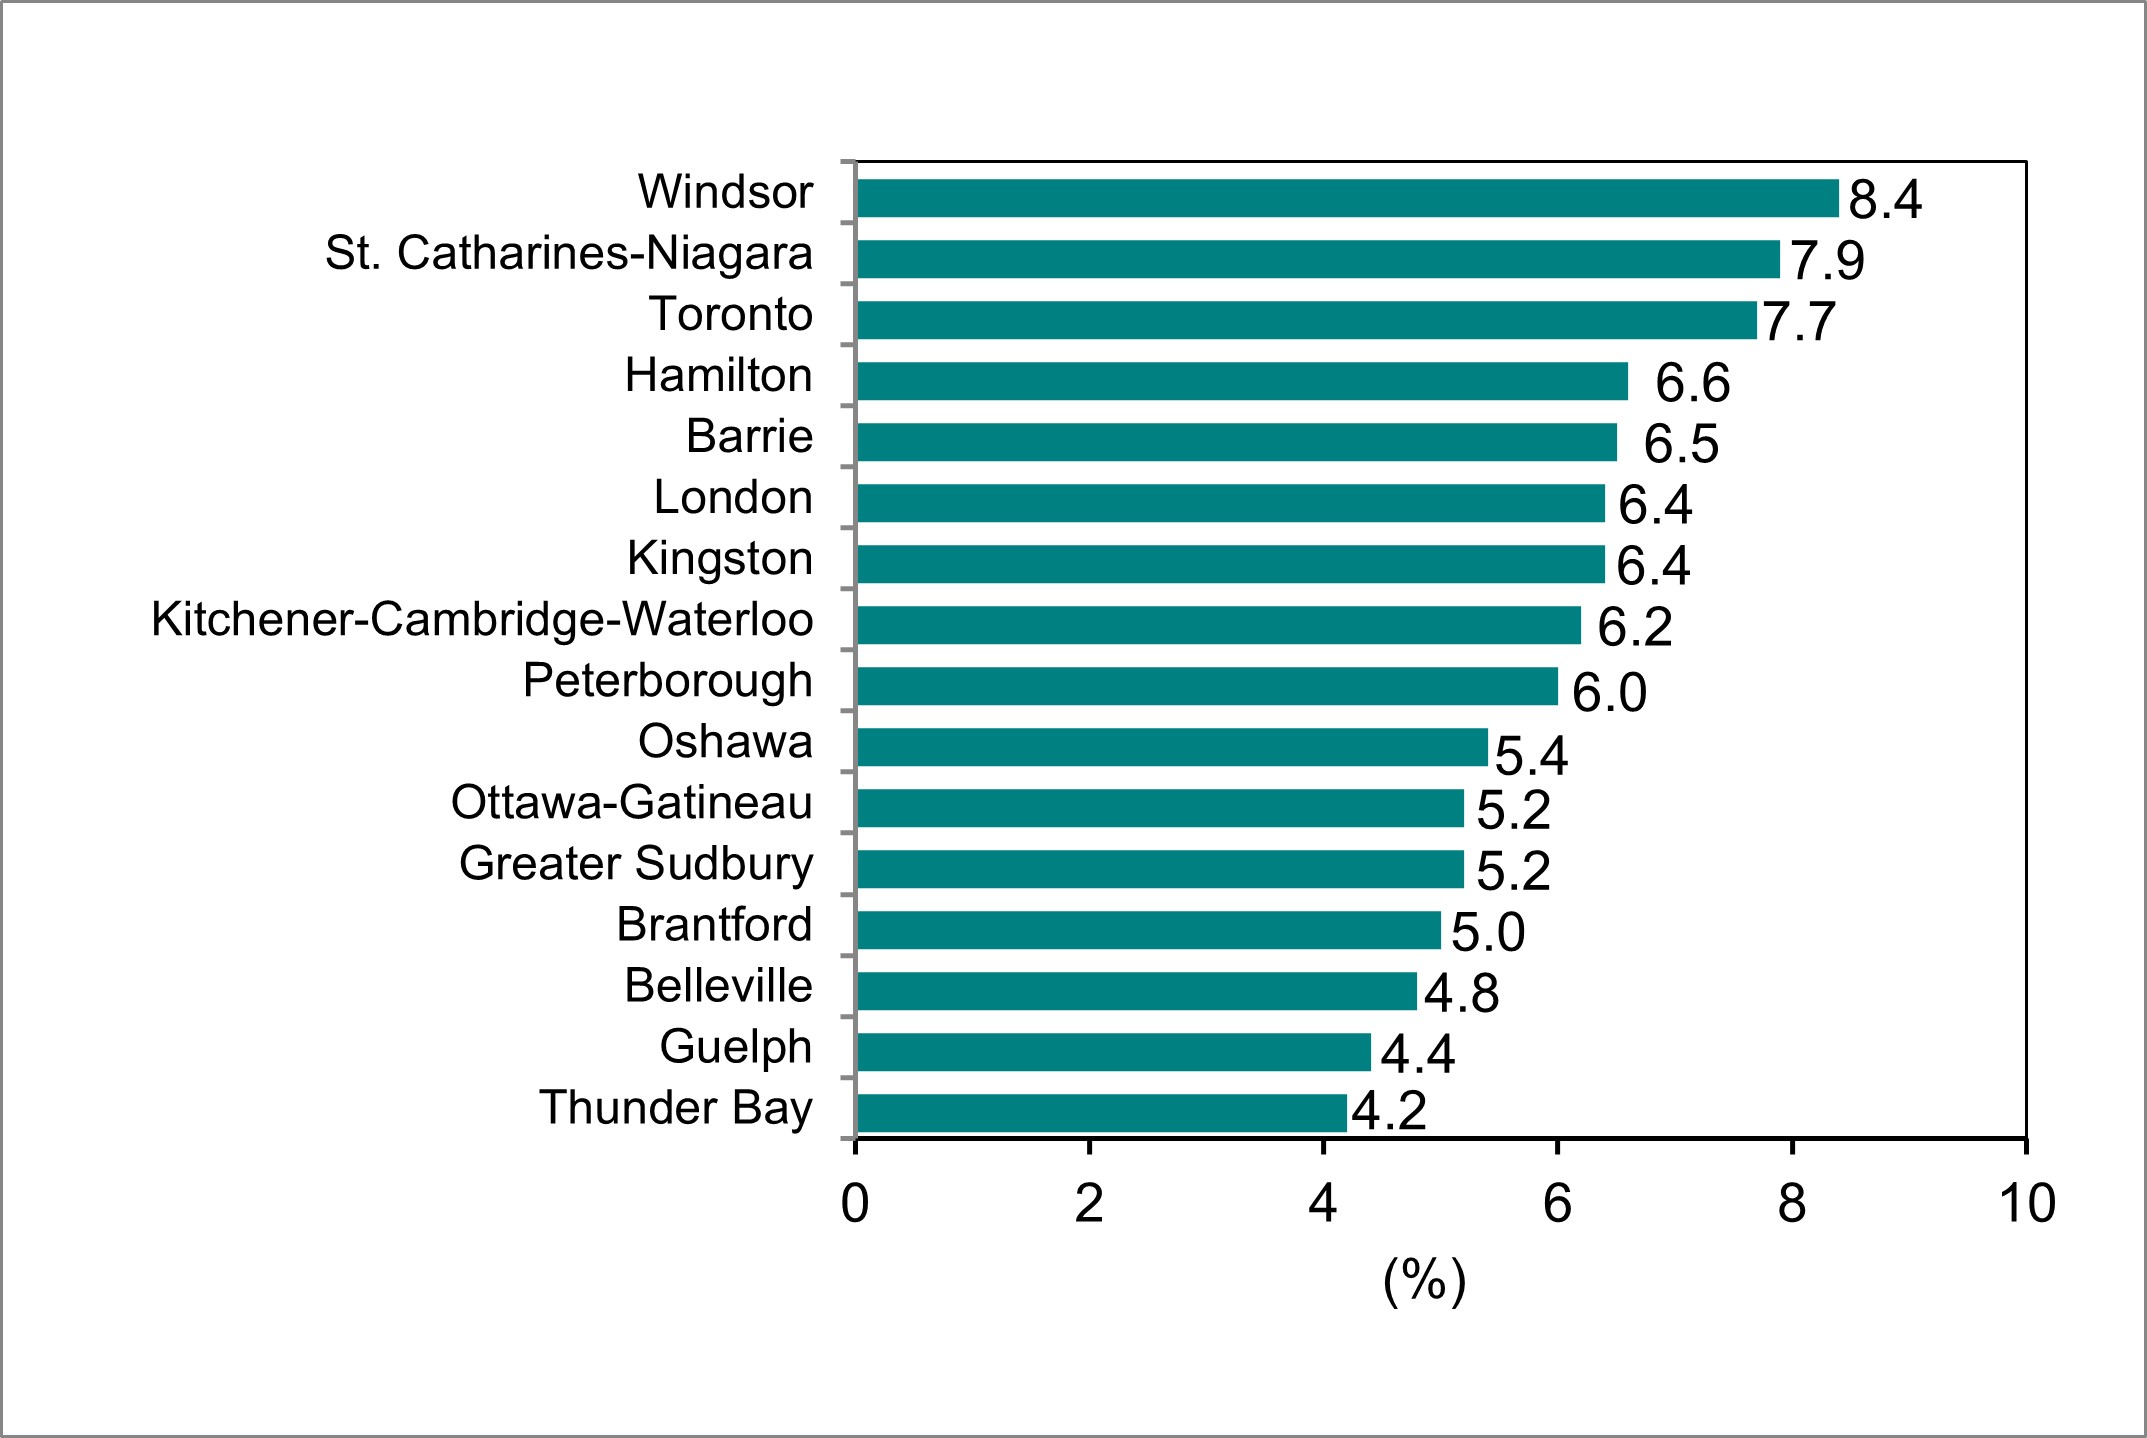 Bar graph for chart 6 shows unemployment rate by Ontario Census Metropolitan Area.